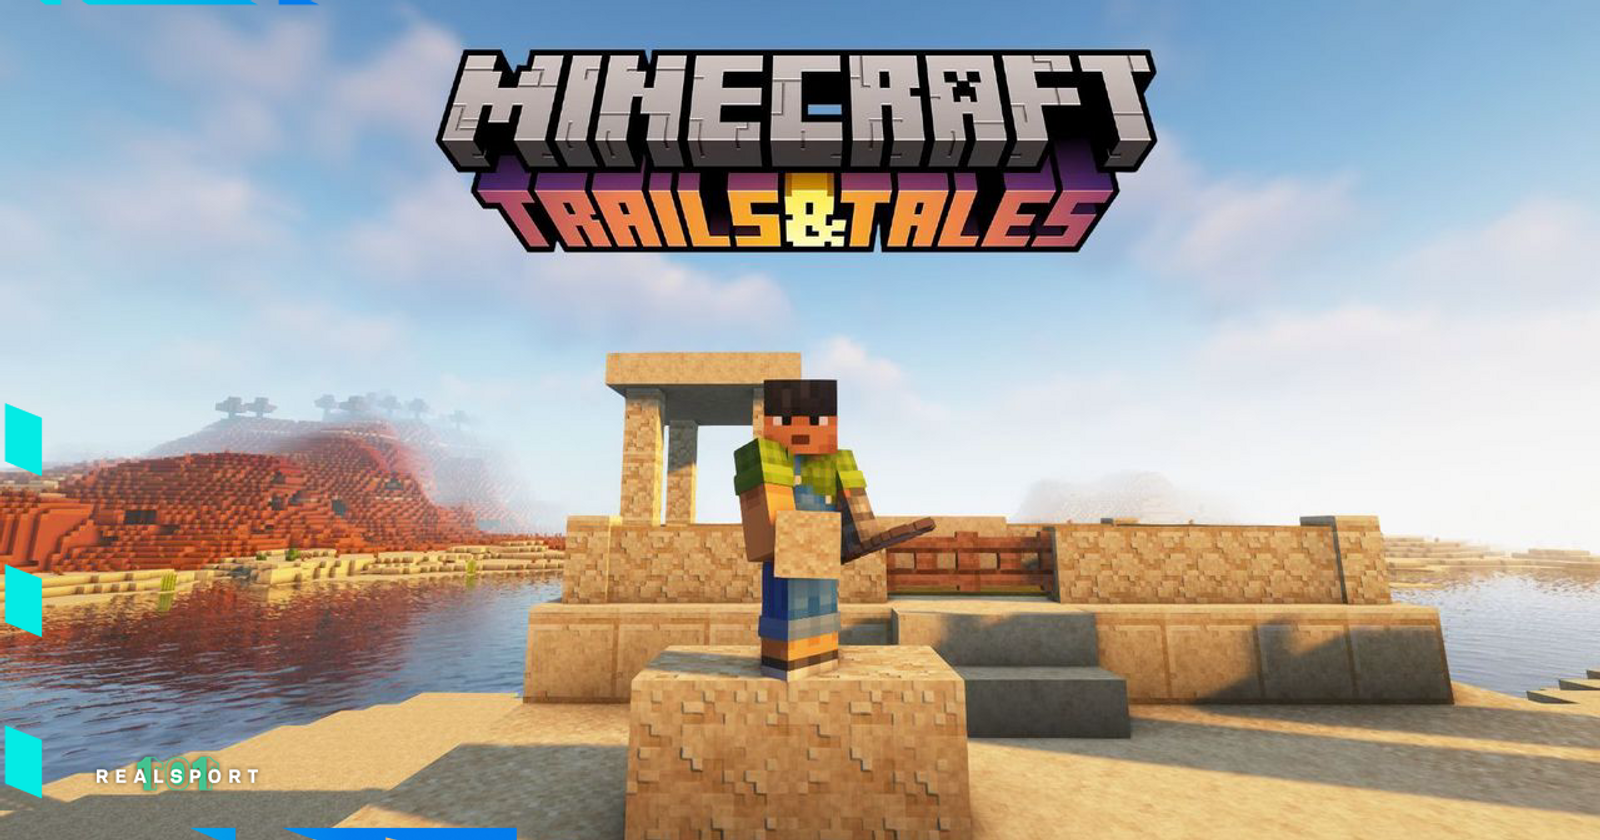 Download Minecraft PE 1.20.12 APK Free: Trails and Tales